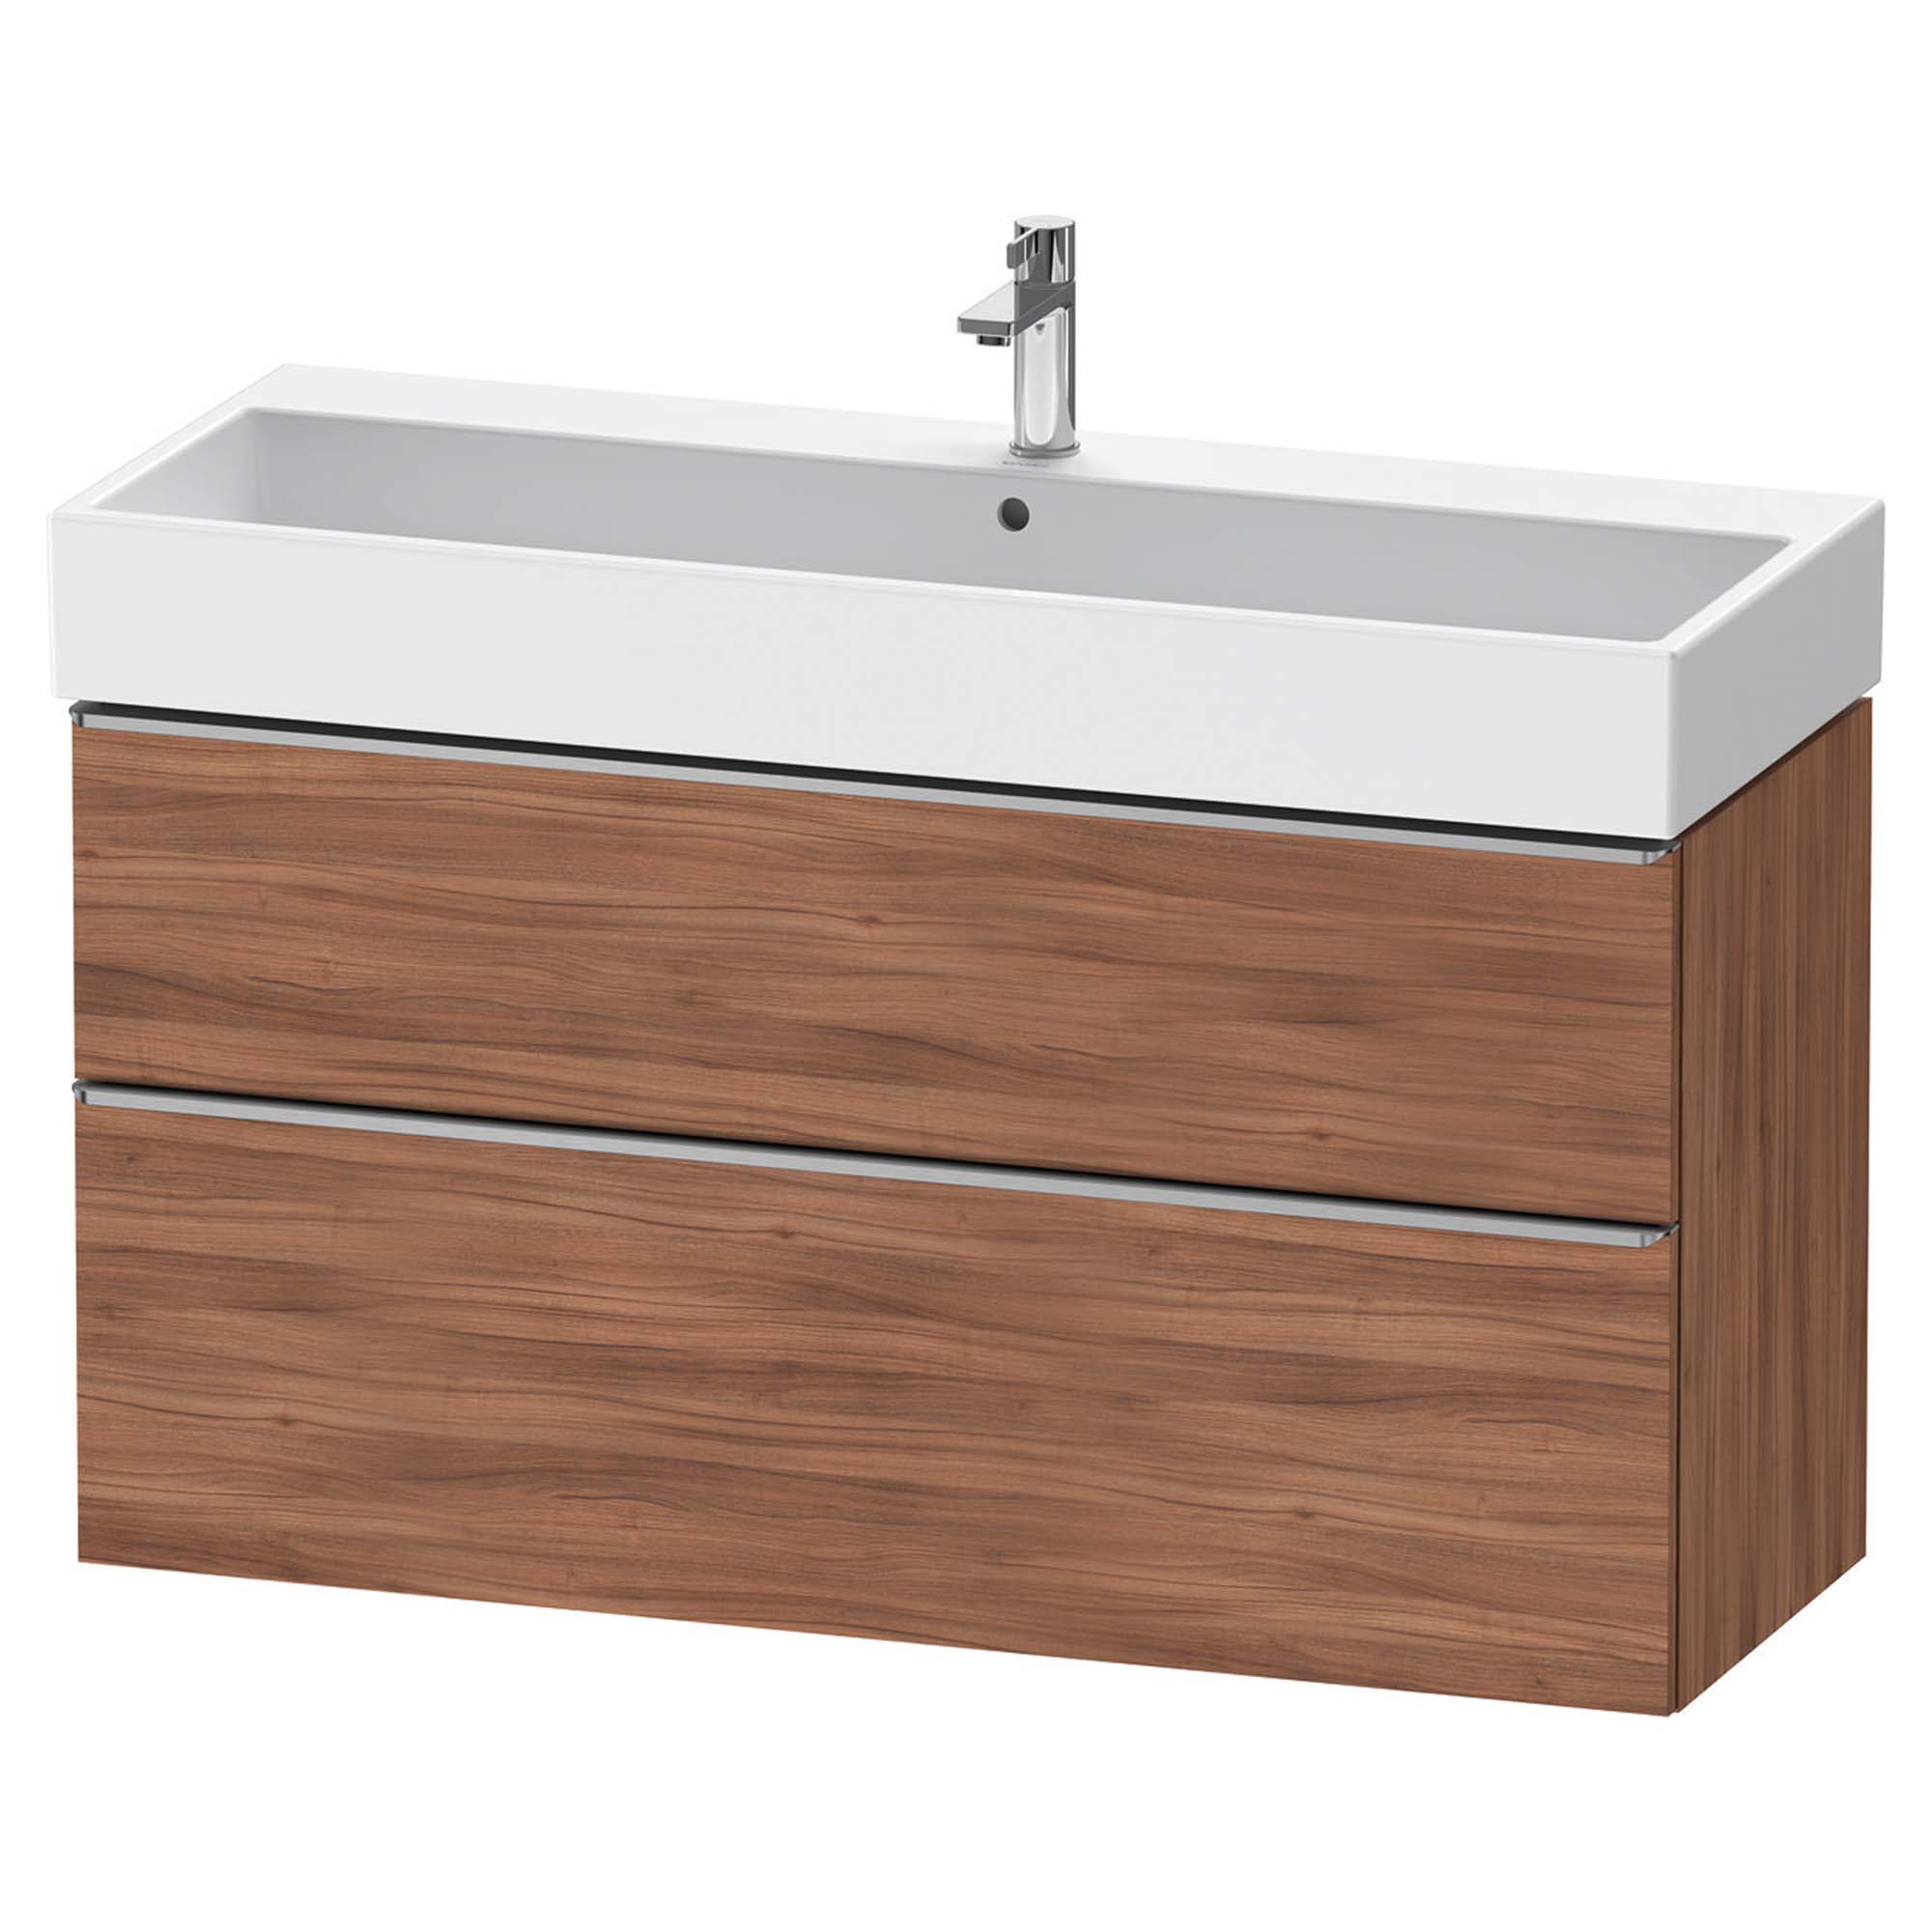 duravit d-neo 1200 wall mounted vanity unit with vero basin walnut stainless steel handles